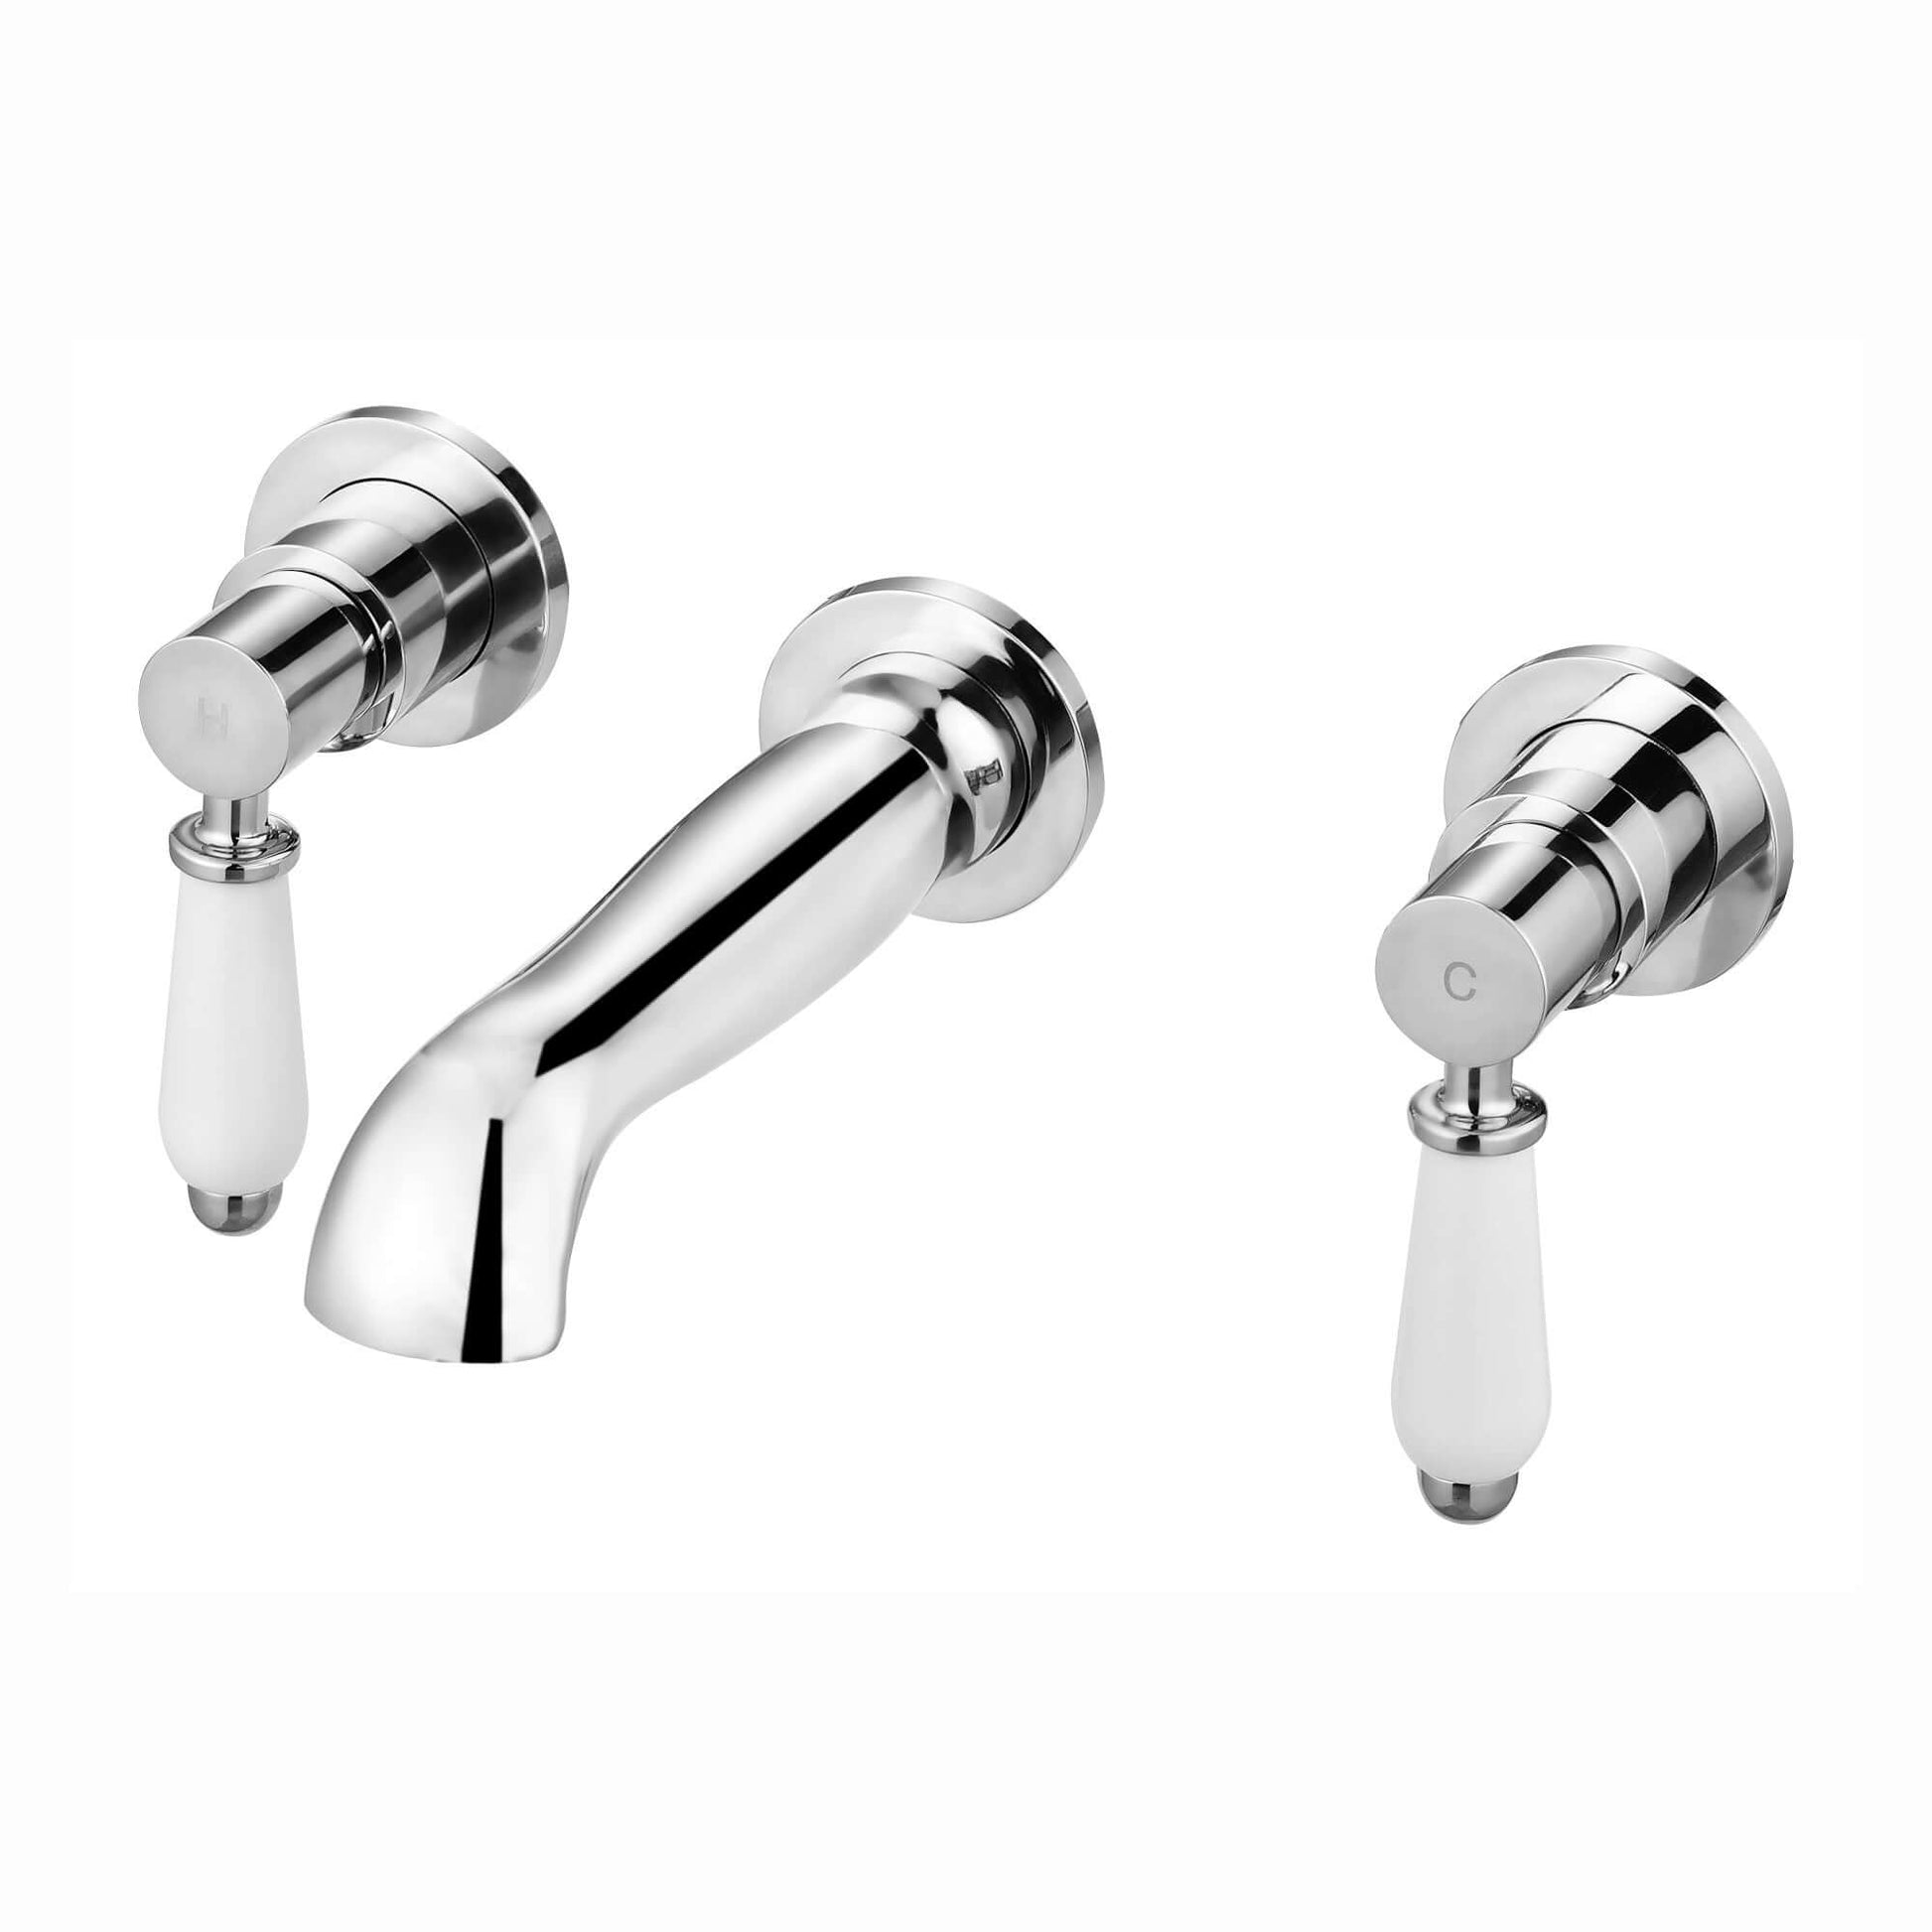 Downton wall-mount basin or bath mixer tap 3 hole with white ceramic levers - chrome - Taps